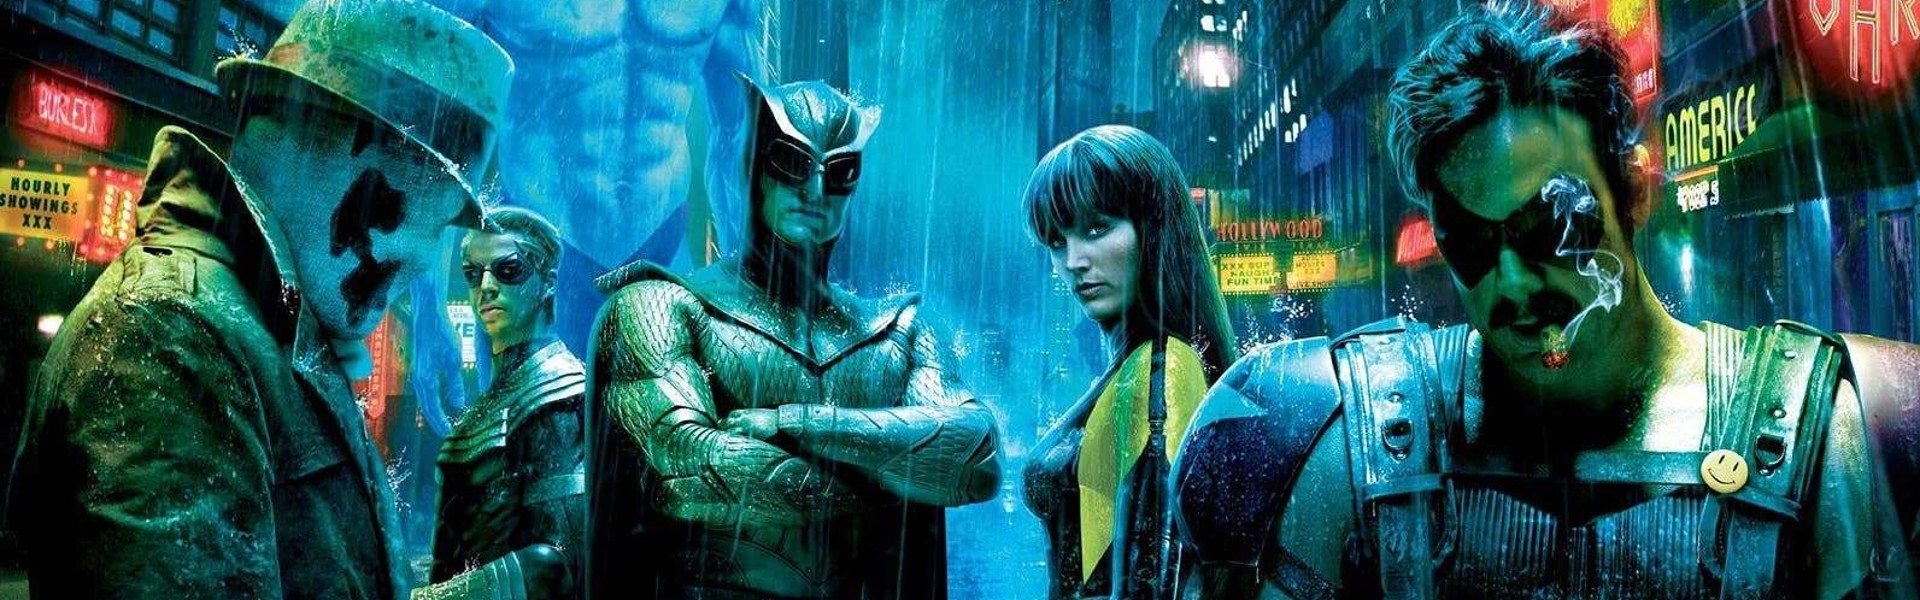 Patrick Wilson praises Zack Snyder’s “Watchmen” and “Guardians” as ahead of the fashion for superheroes